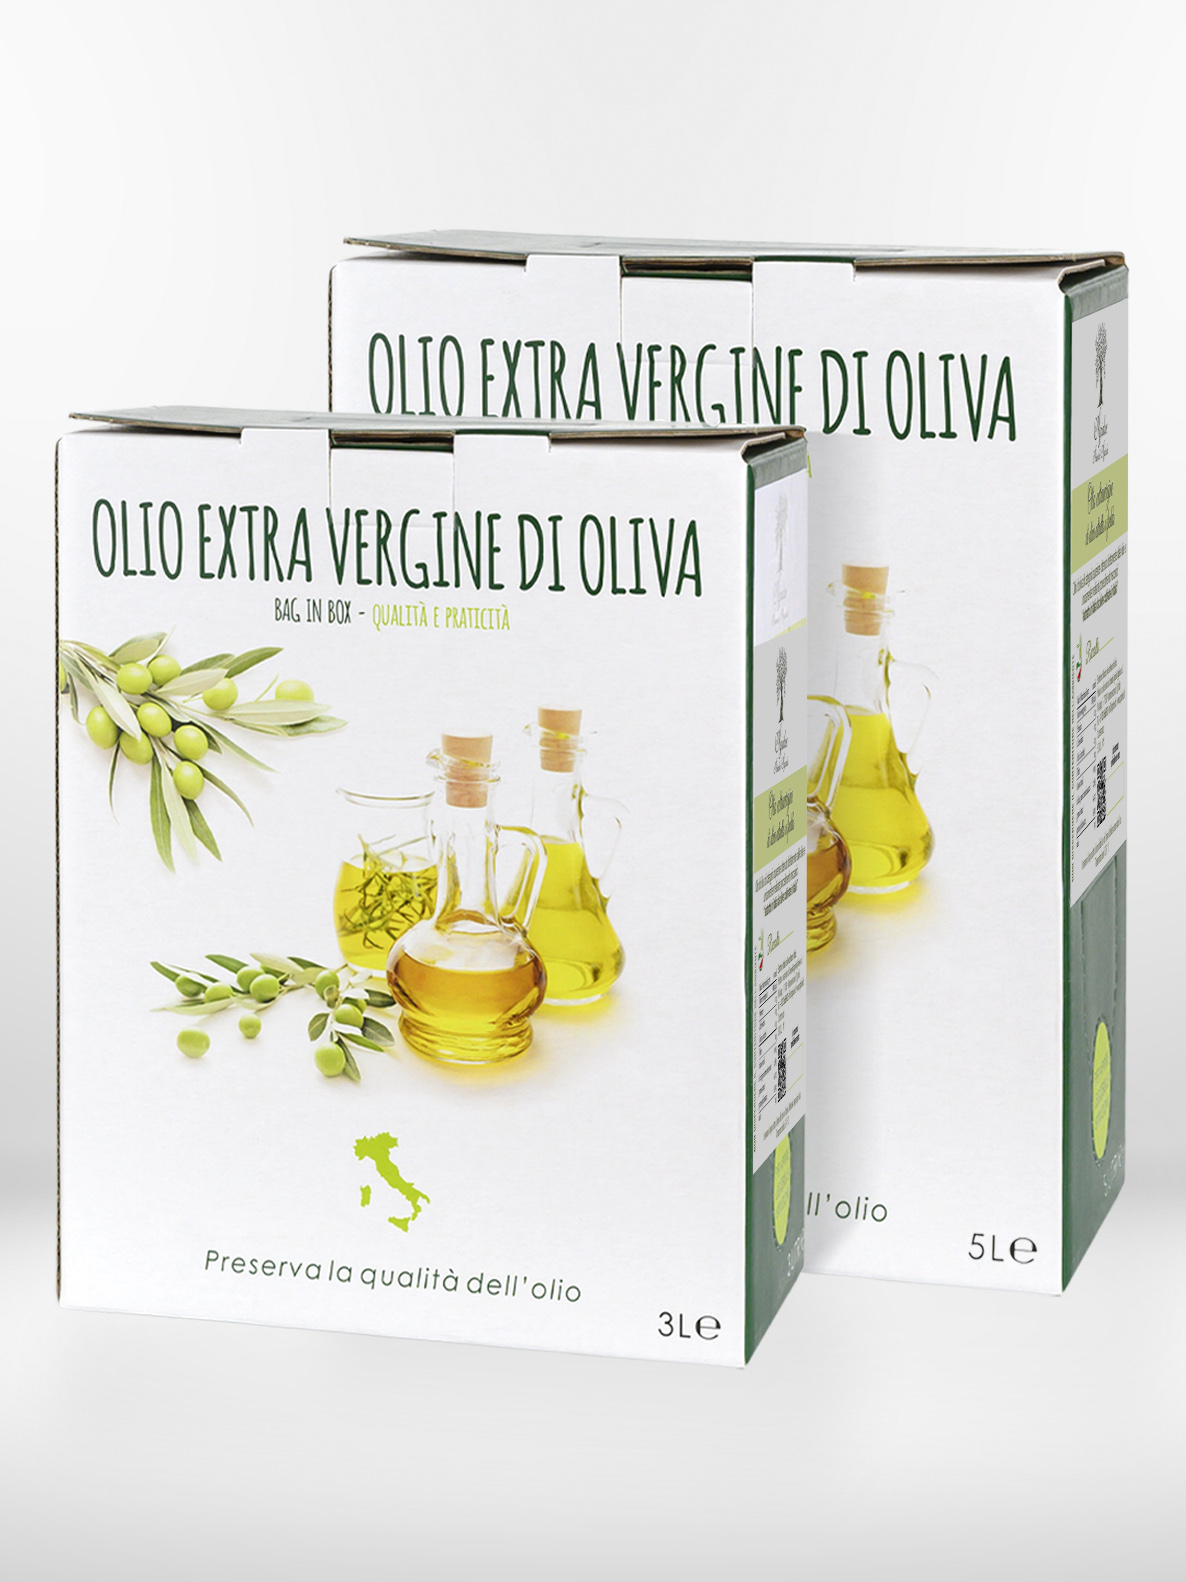 Packaging of olive oil, bag in box format of 5 liters and 3 liters, produced in Puglia, Agridue brand.